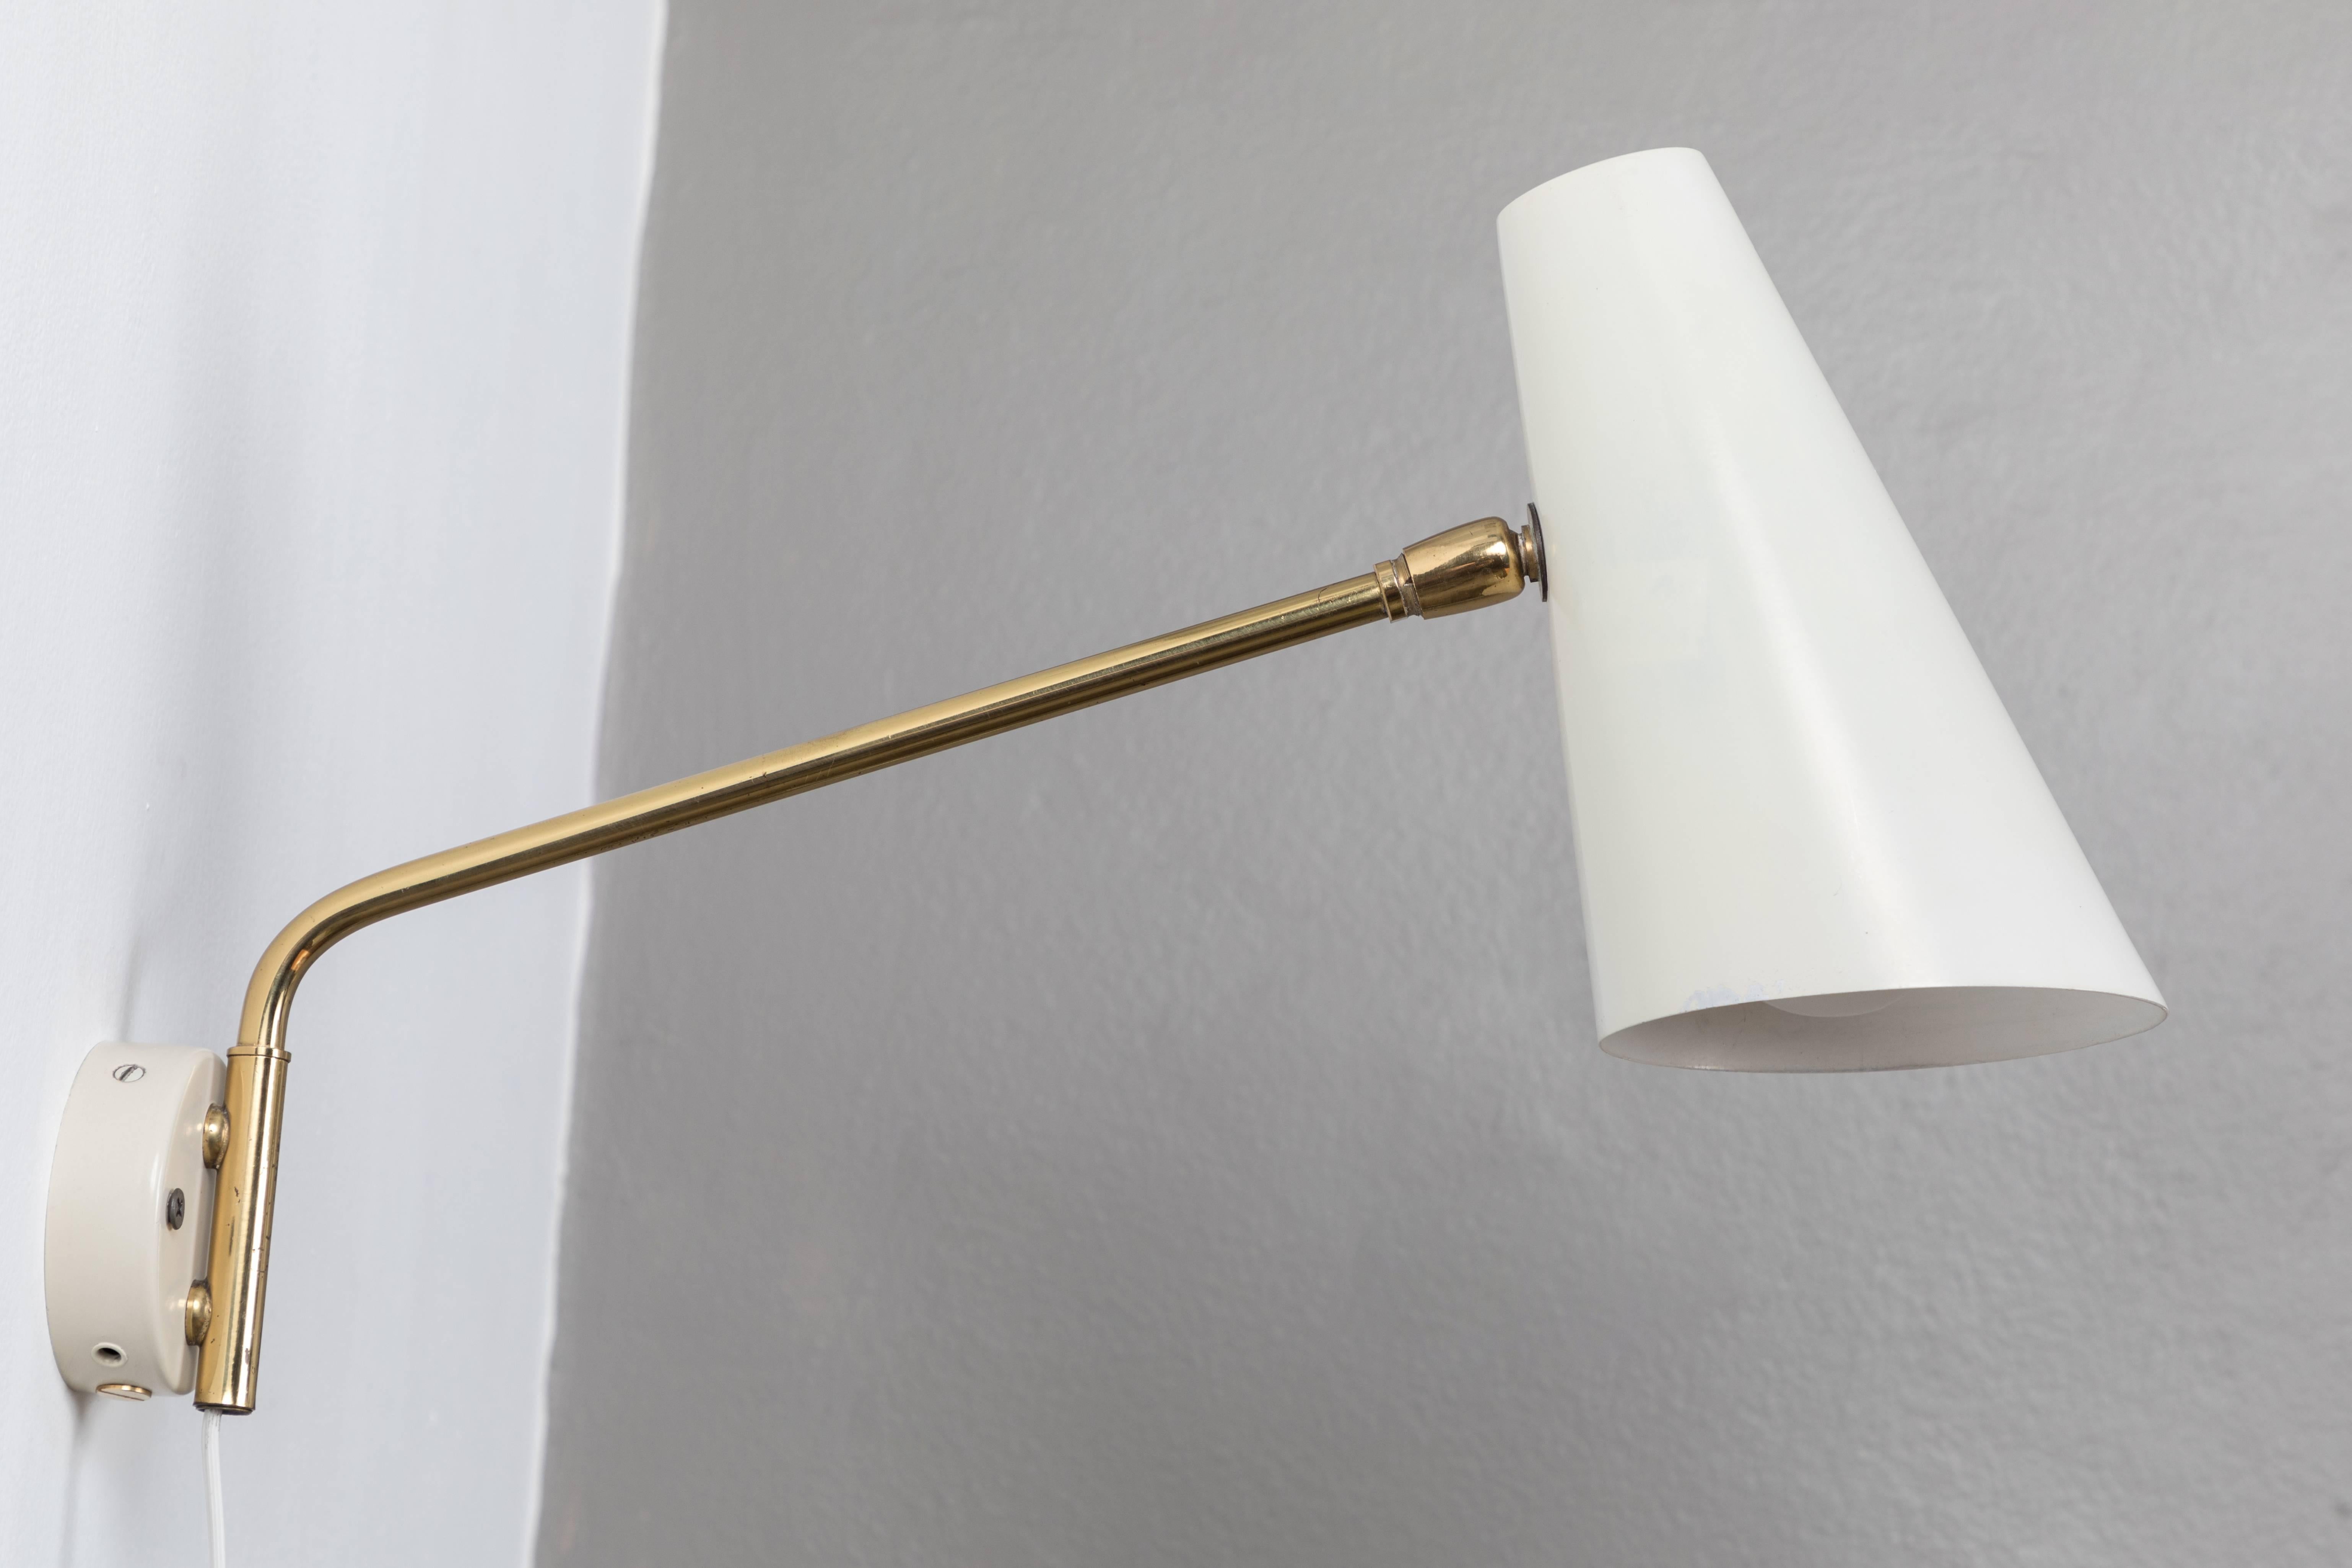 1960s Cosack Leuchten articulating wall light. Executed in white enameled metal and brass in the manner highly reminiscent of Paavo Tynell's 9459 wall lights. A very architectural and refined wall lamp that can be easily adjusted to various lengths